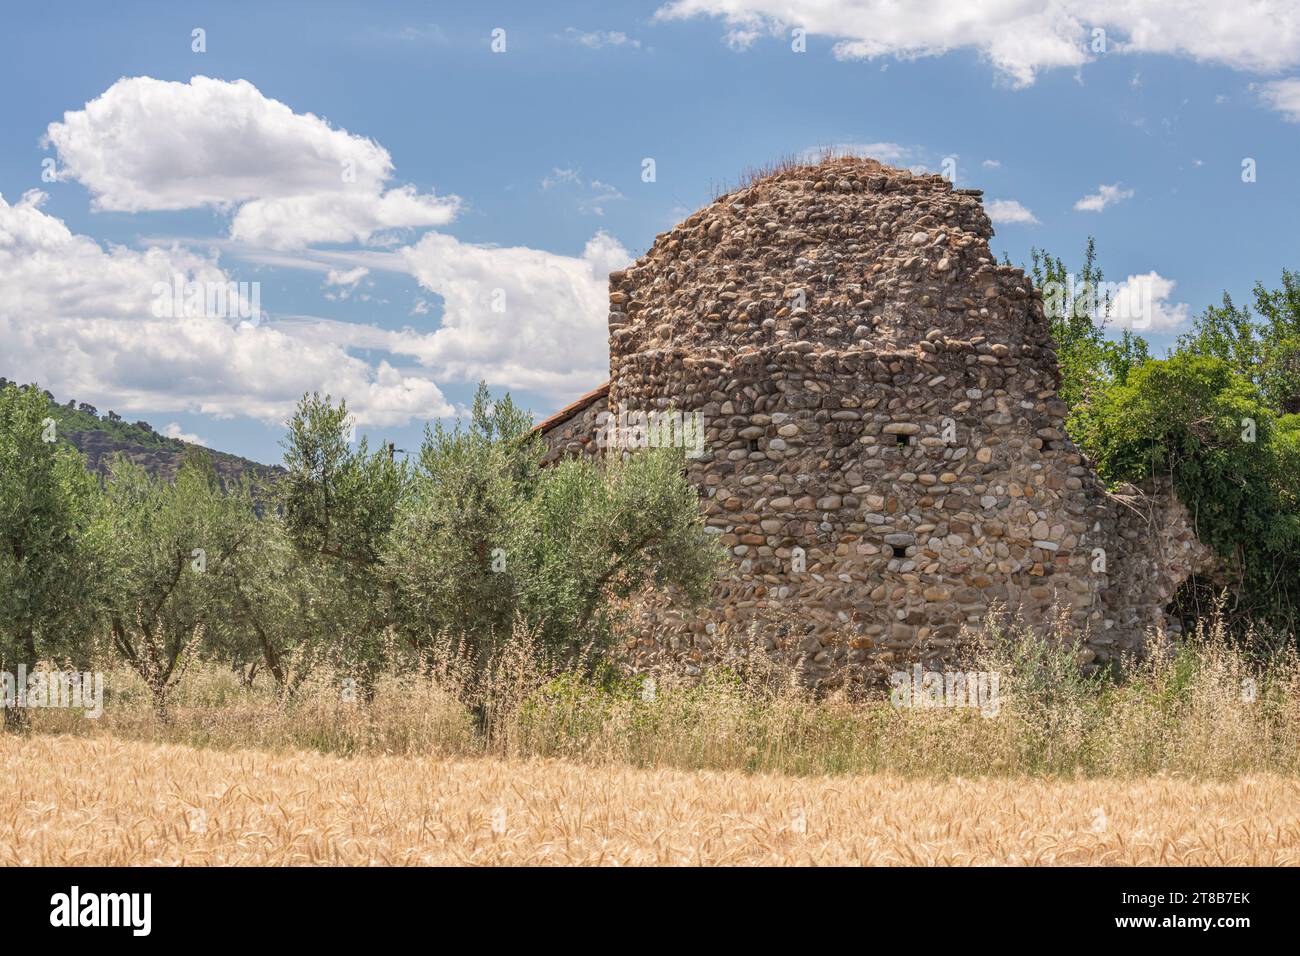 Single seemingly abandoned ruin of a stone cottage n the middle of a agricultural field and olive trees Stock Photo